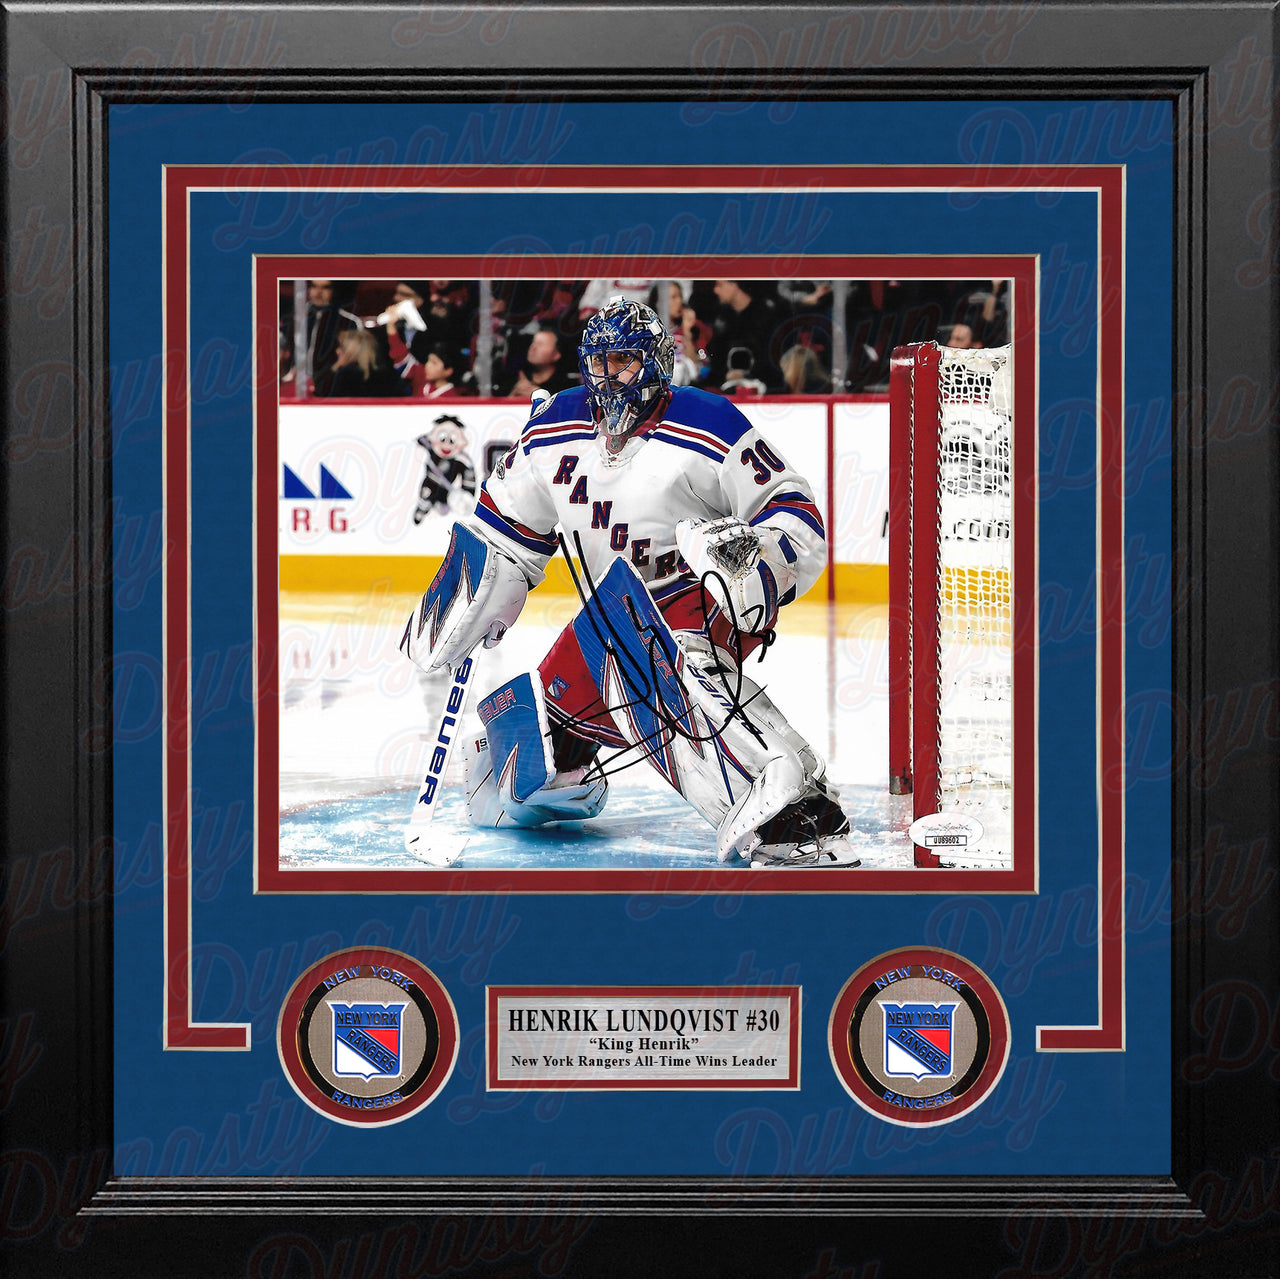 Henrik Lundqvist in Action New York Rangers Autographed 8" x 10" Framed Hockey Photo - Dynasty Sports & Framing 